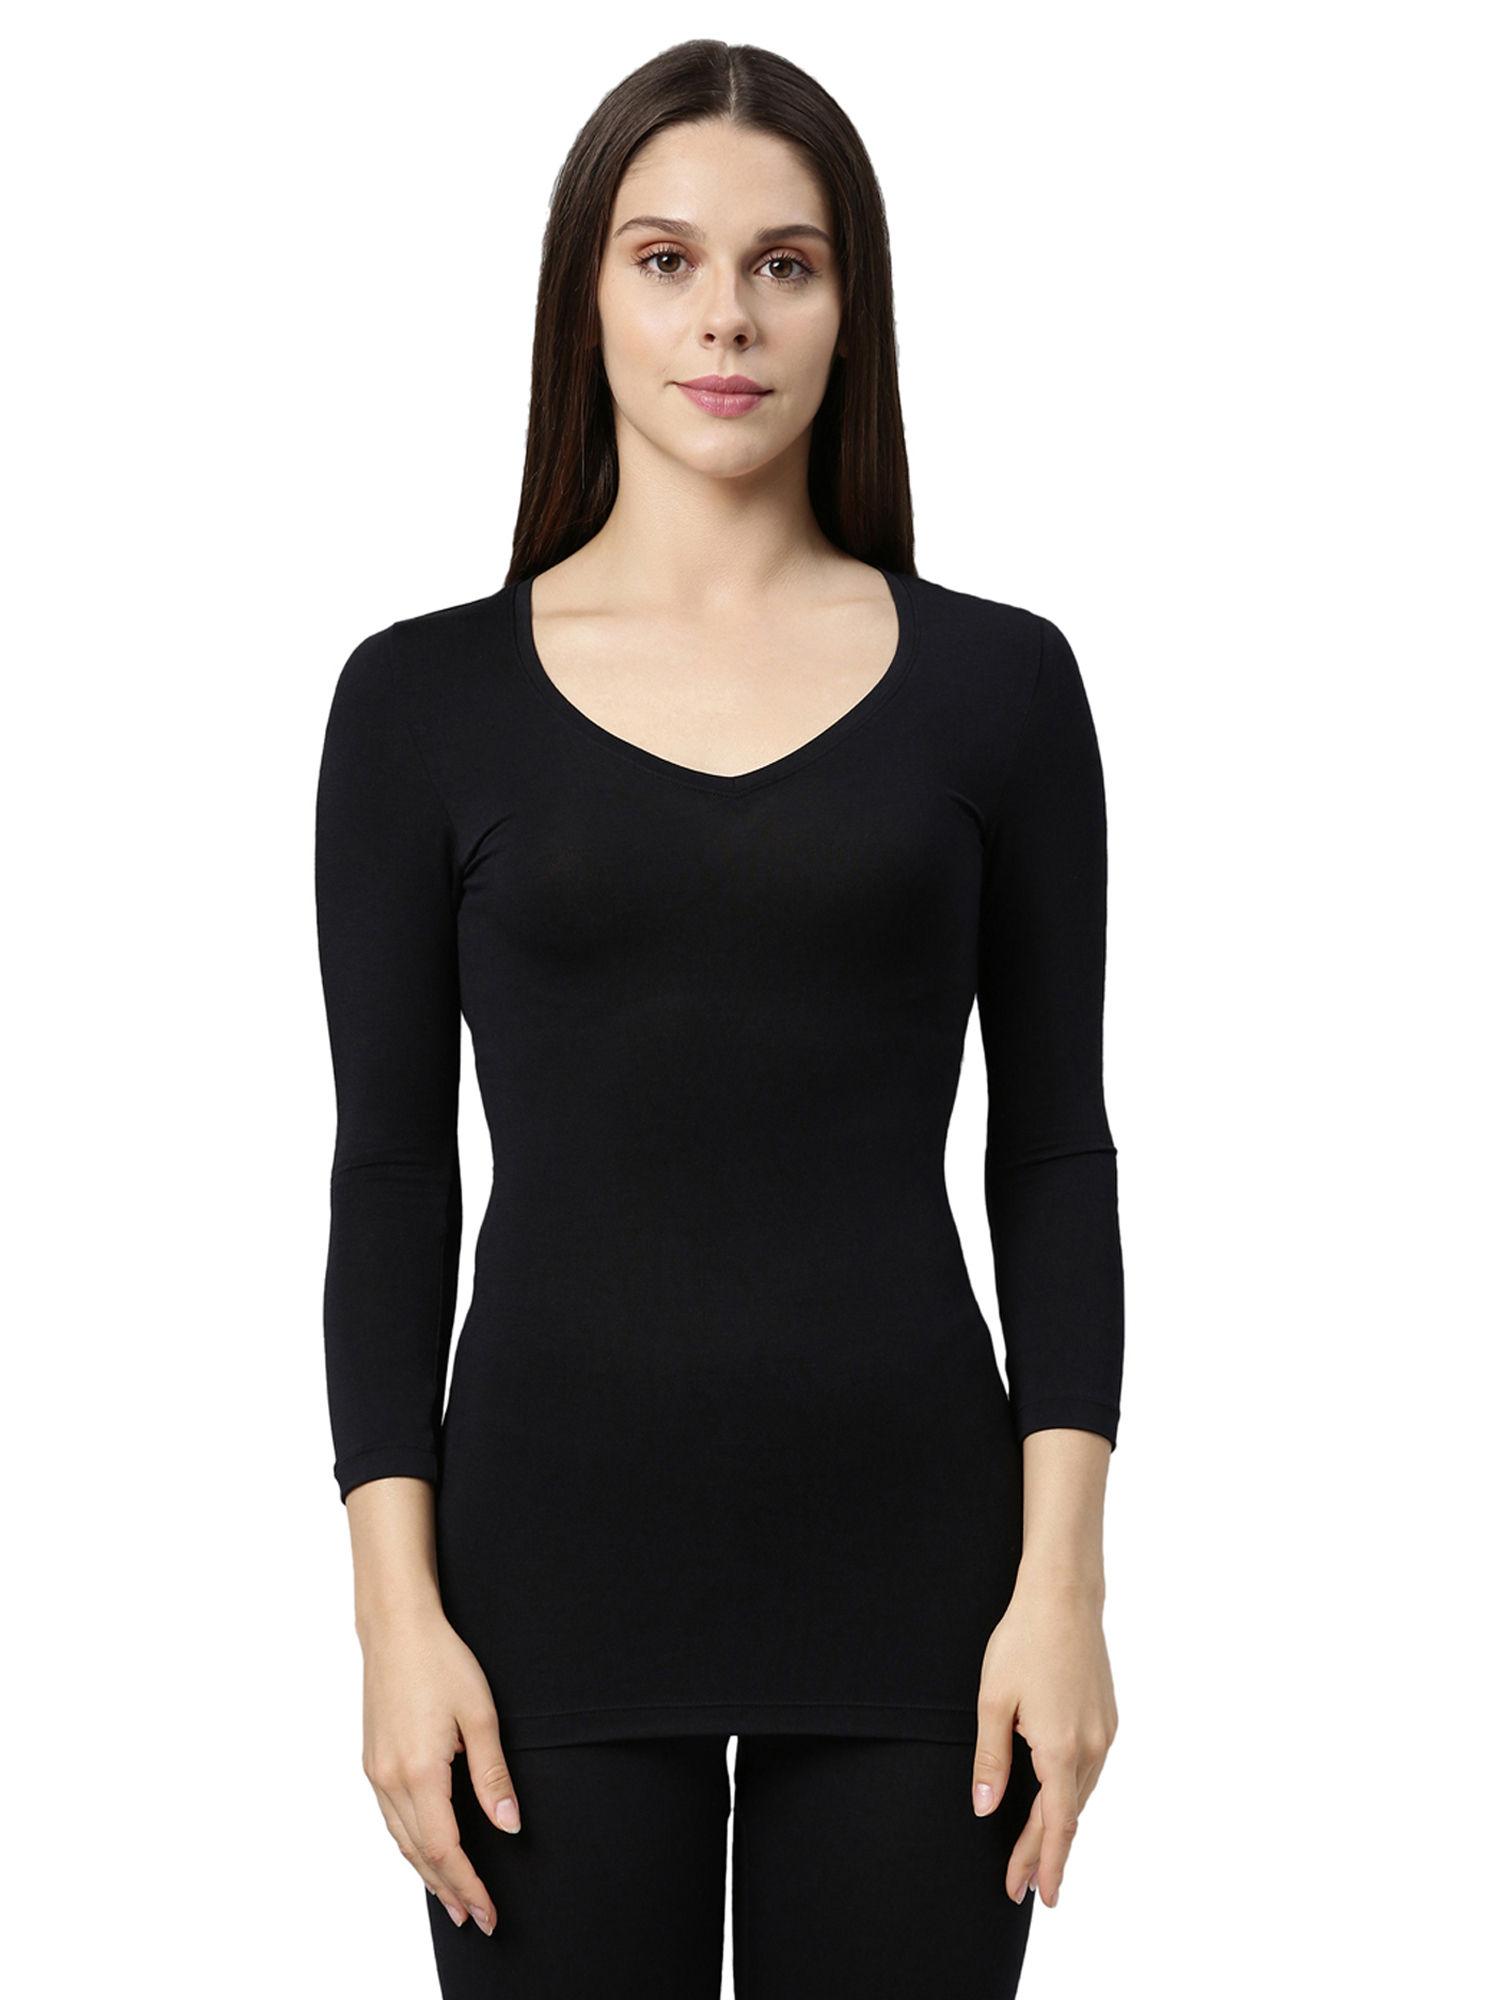 women's v-neck 3/4th thermal top with sweat wicking and antimicrobial finish - black